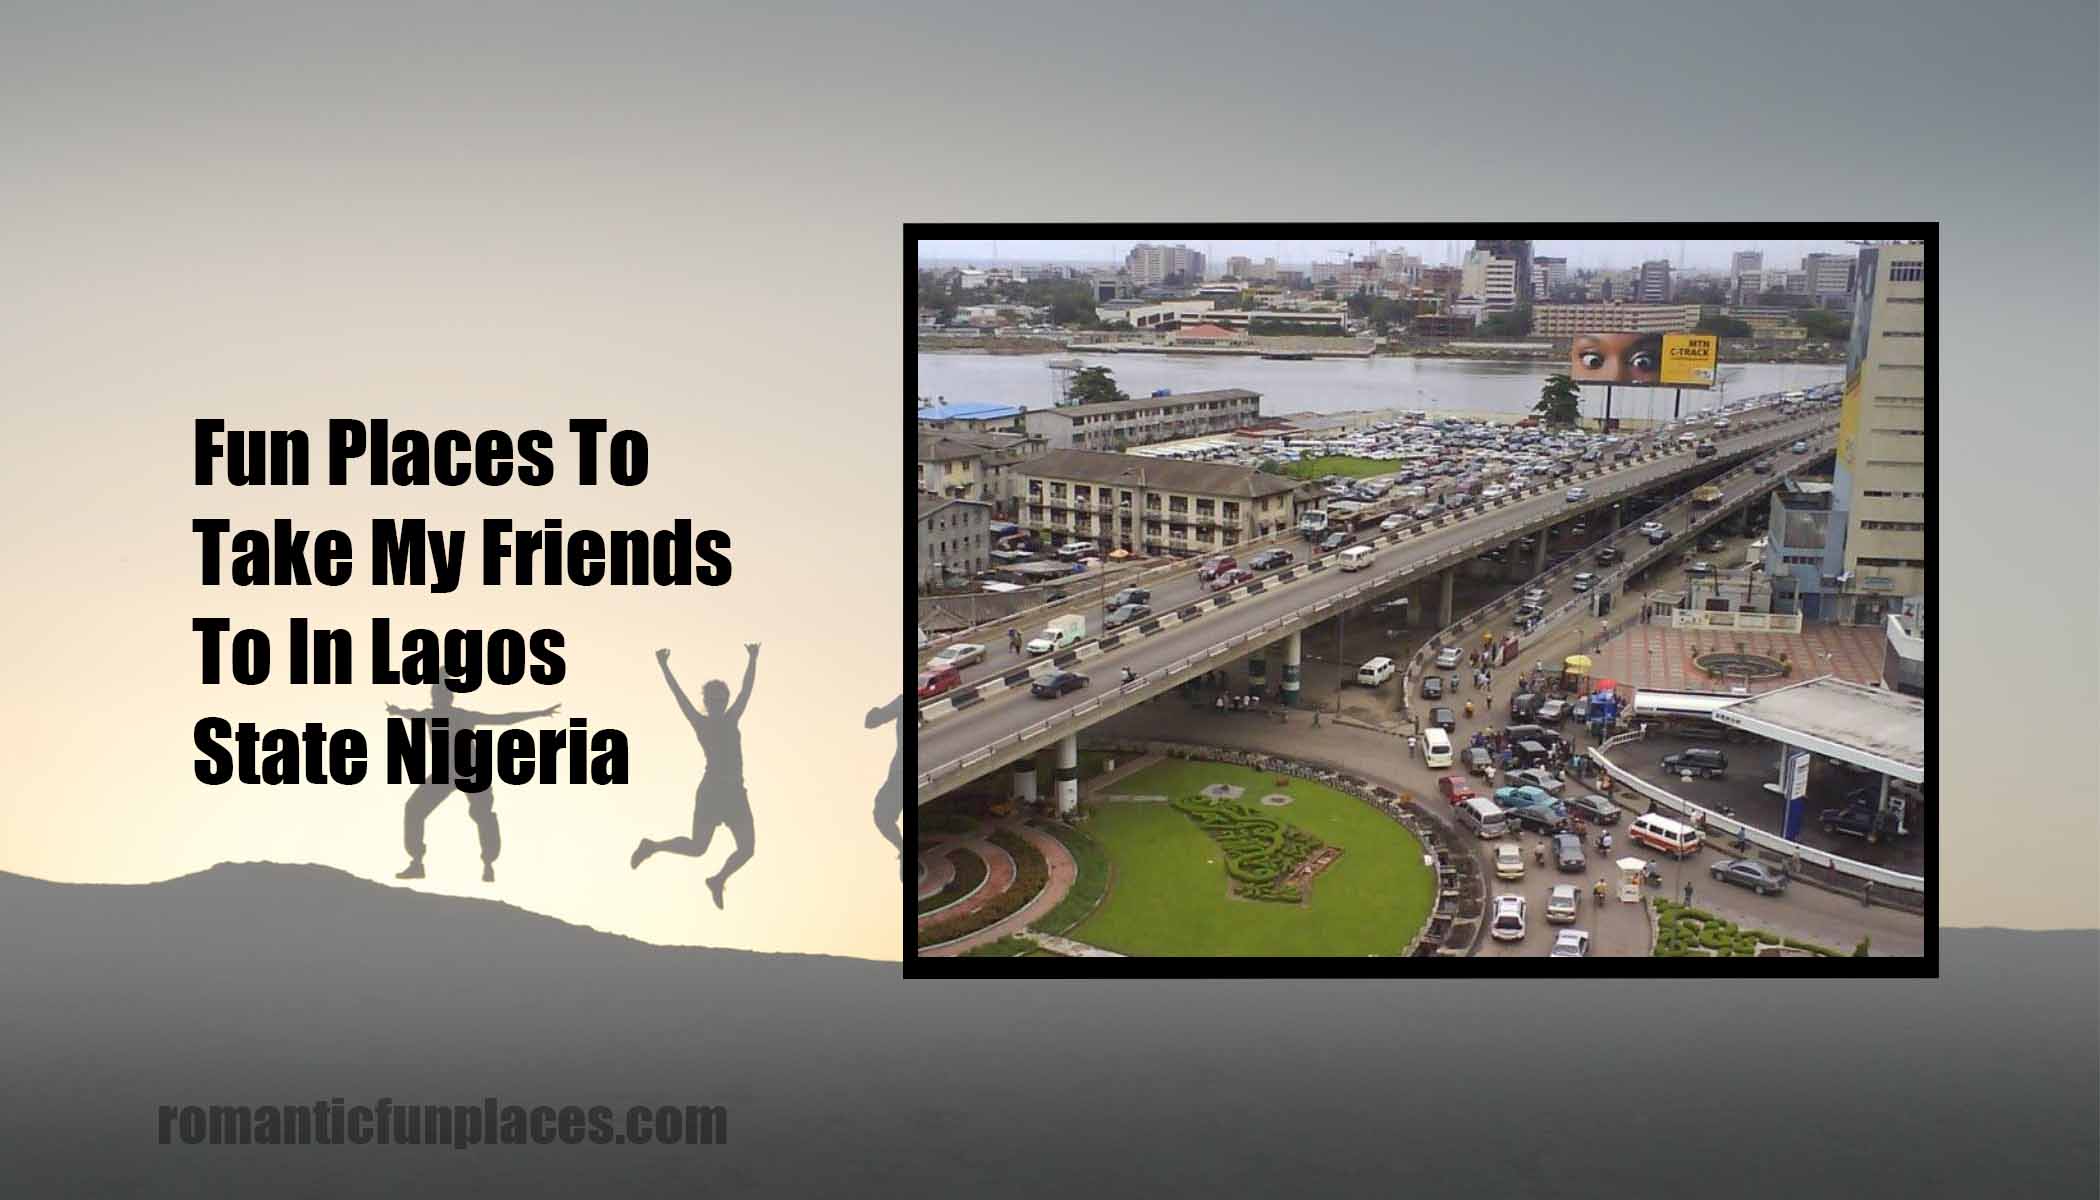 Fun Places To Take My Friends To In Lagos State Nigeria